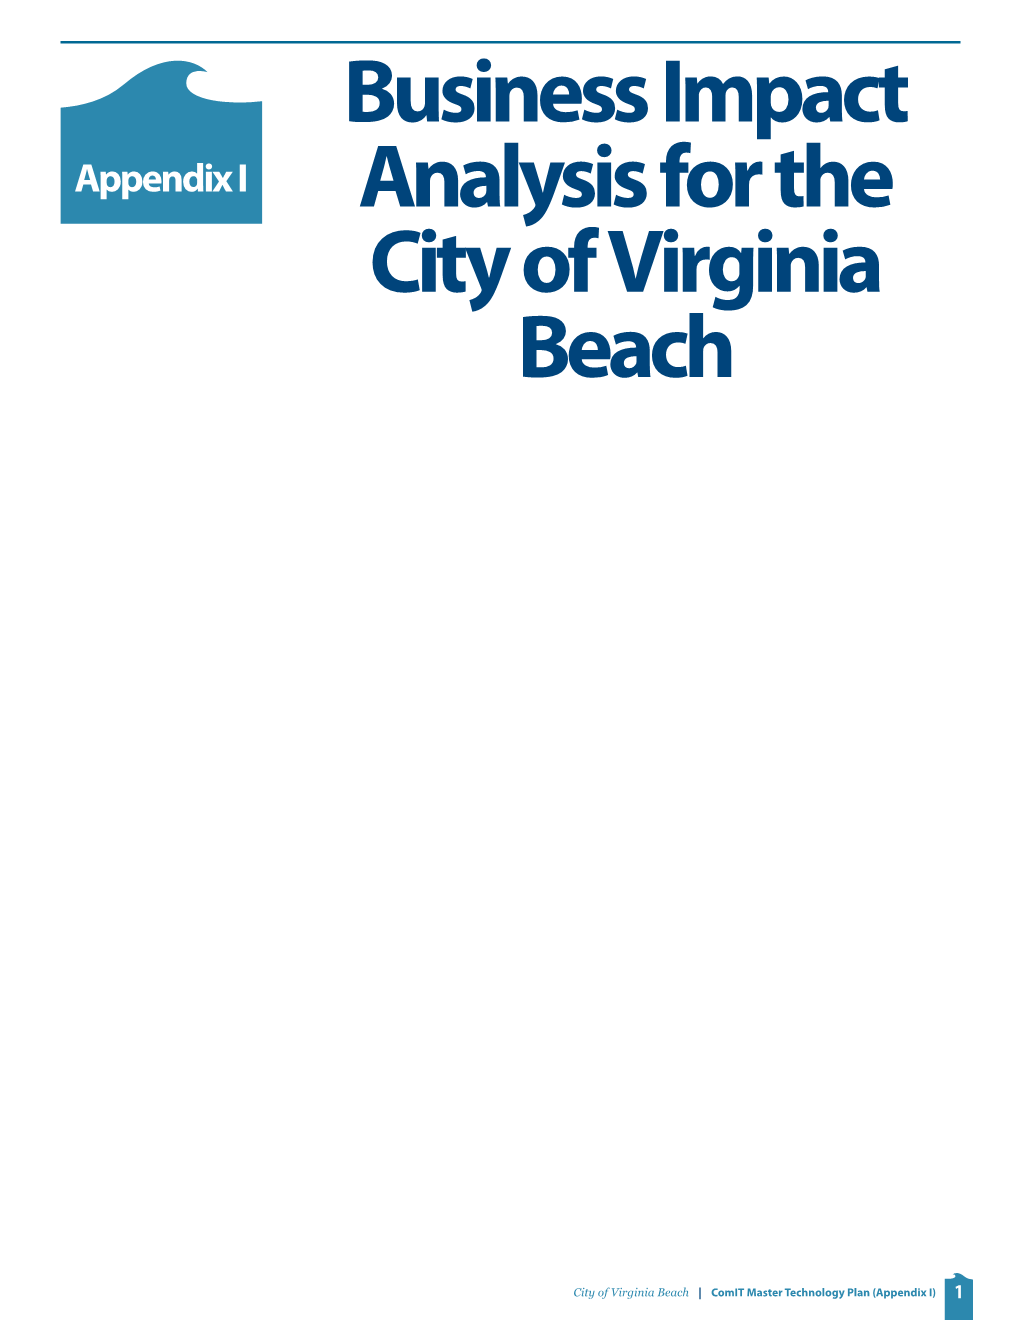 Business Impact Analysis for the City of Virginia Beach